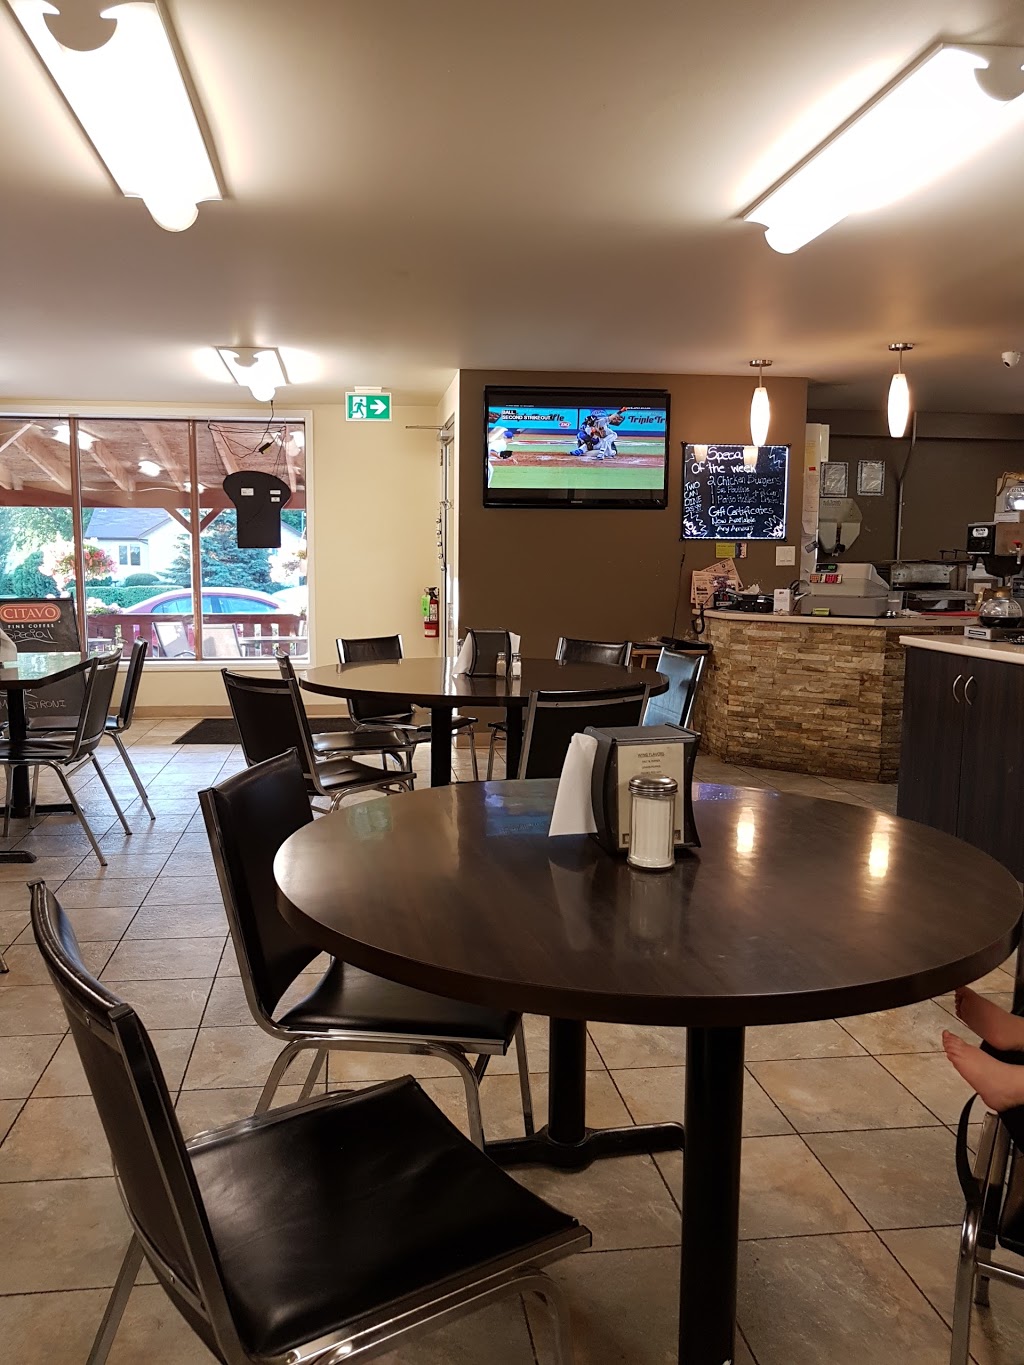 The Patio Grill | restaurant | 98 Main St, Grunthal, MB R0A 0R0, Canada | 2044346058 OR +1 204-434-6058